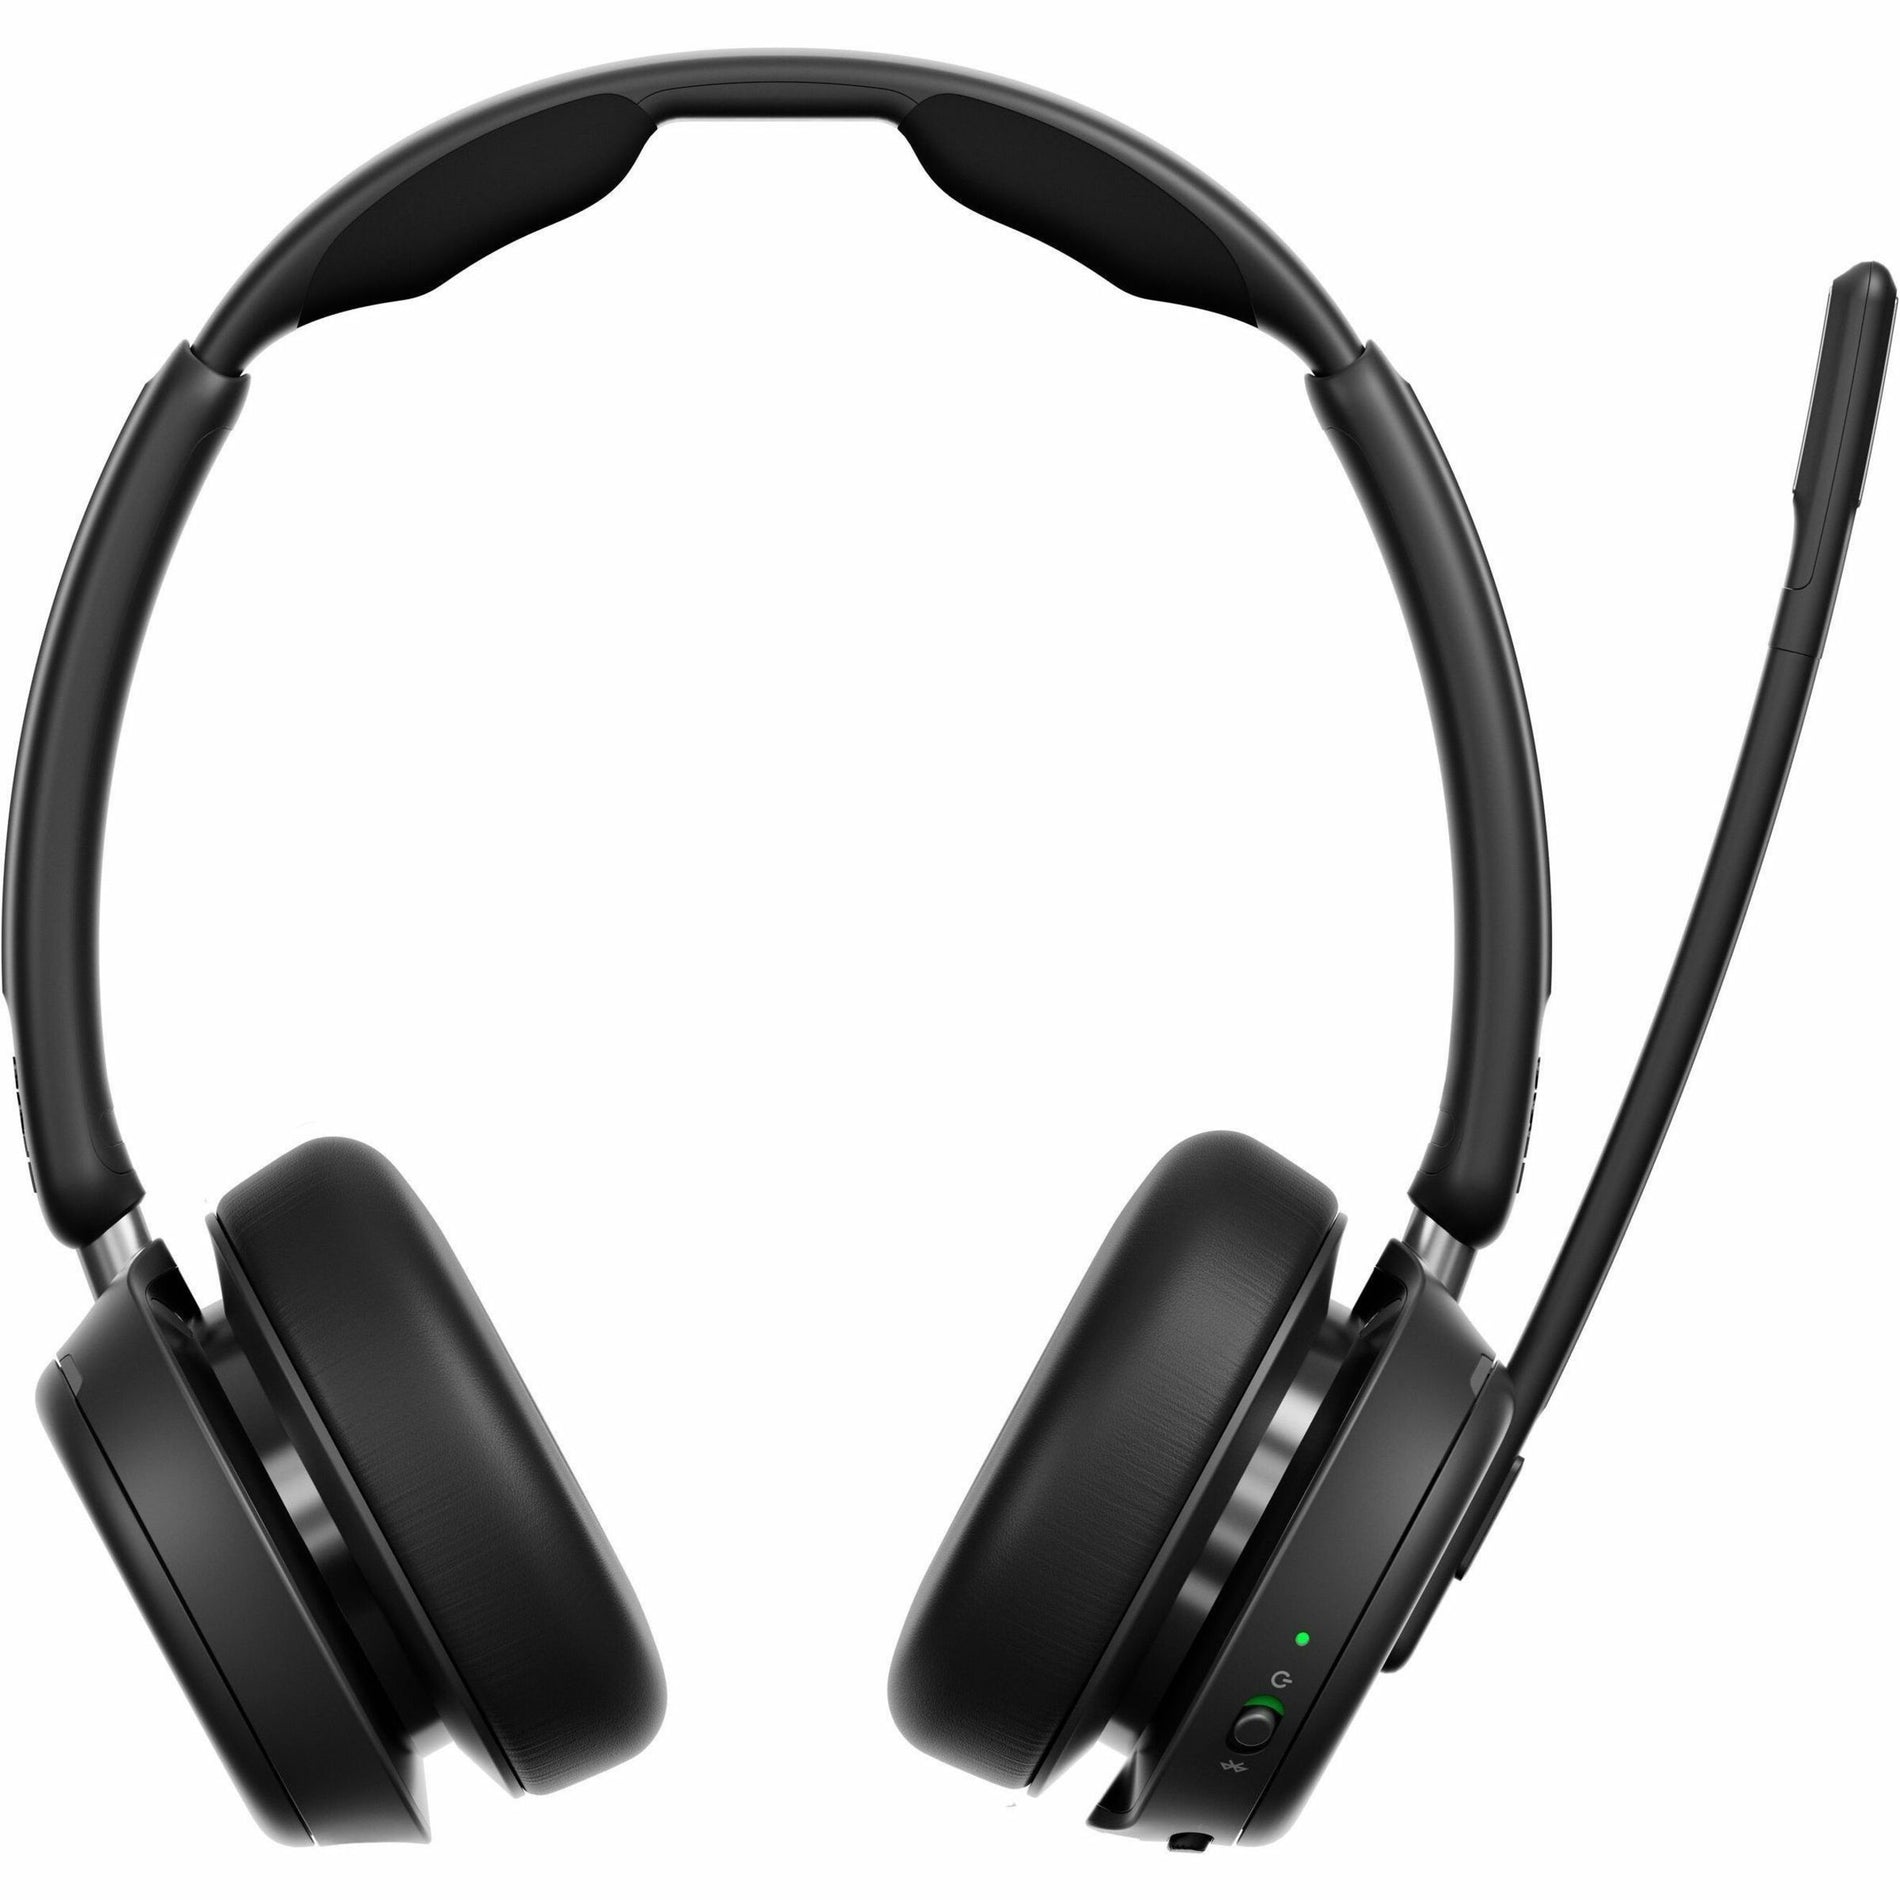 EPOS 1001138 IMPACT 1060T Headset, Wireless Bluetooth On-ear Headset with Active Noise Canceling